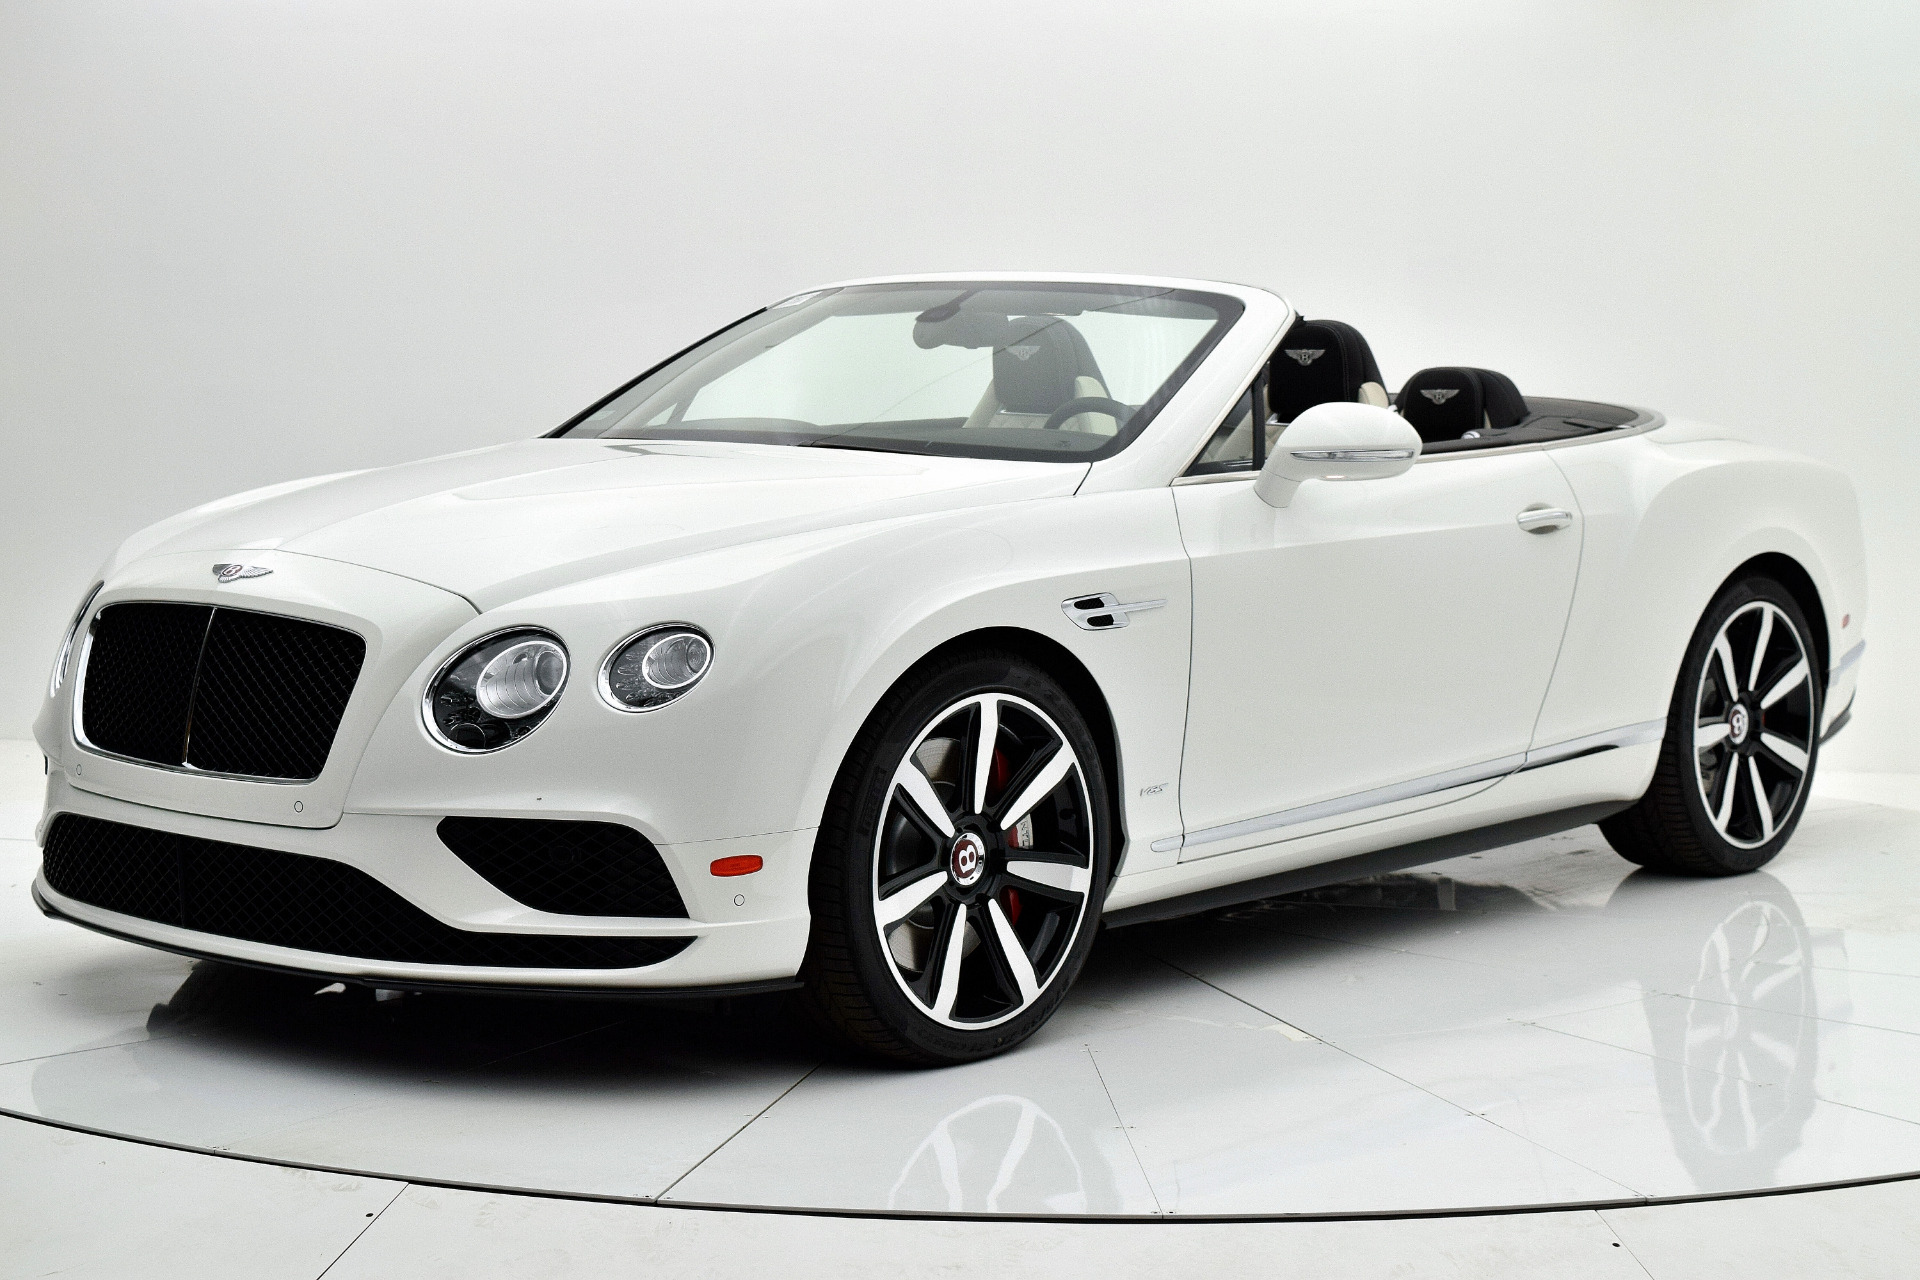 New 2017 Bentley Continental GT V8 S Convertible for sale Sold at Bentley Palmyra N.J. in Palmyra NJ 08065 2